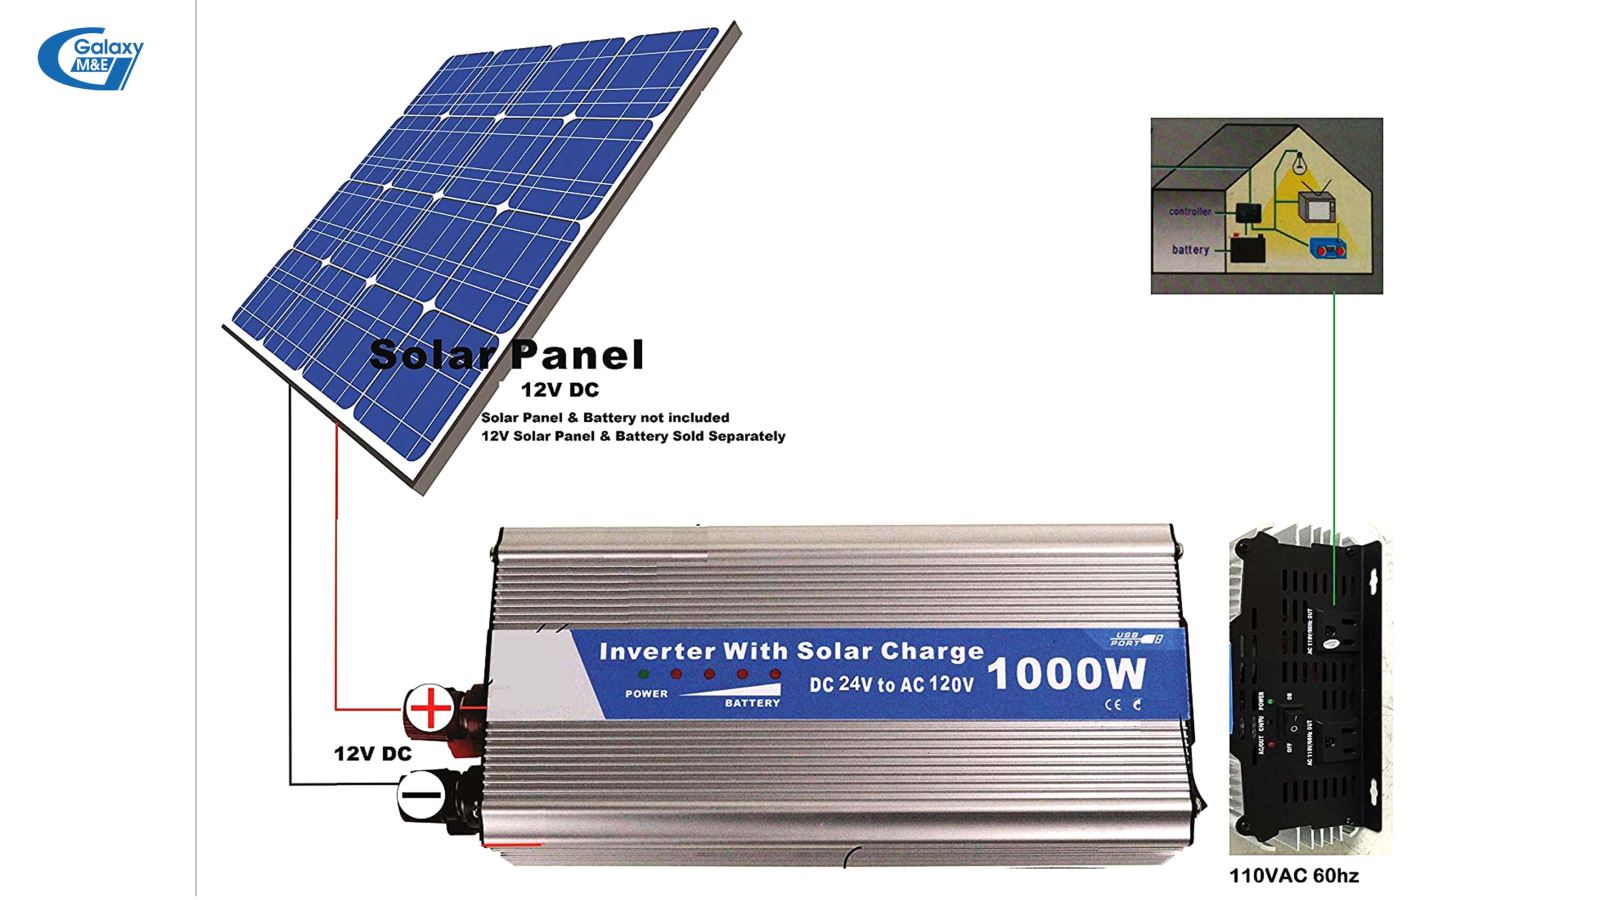 For each system, there will be different types of inverters of different manufacturers.